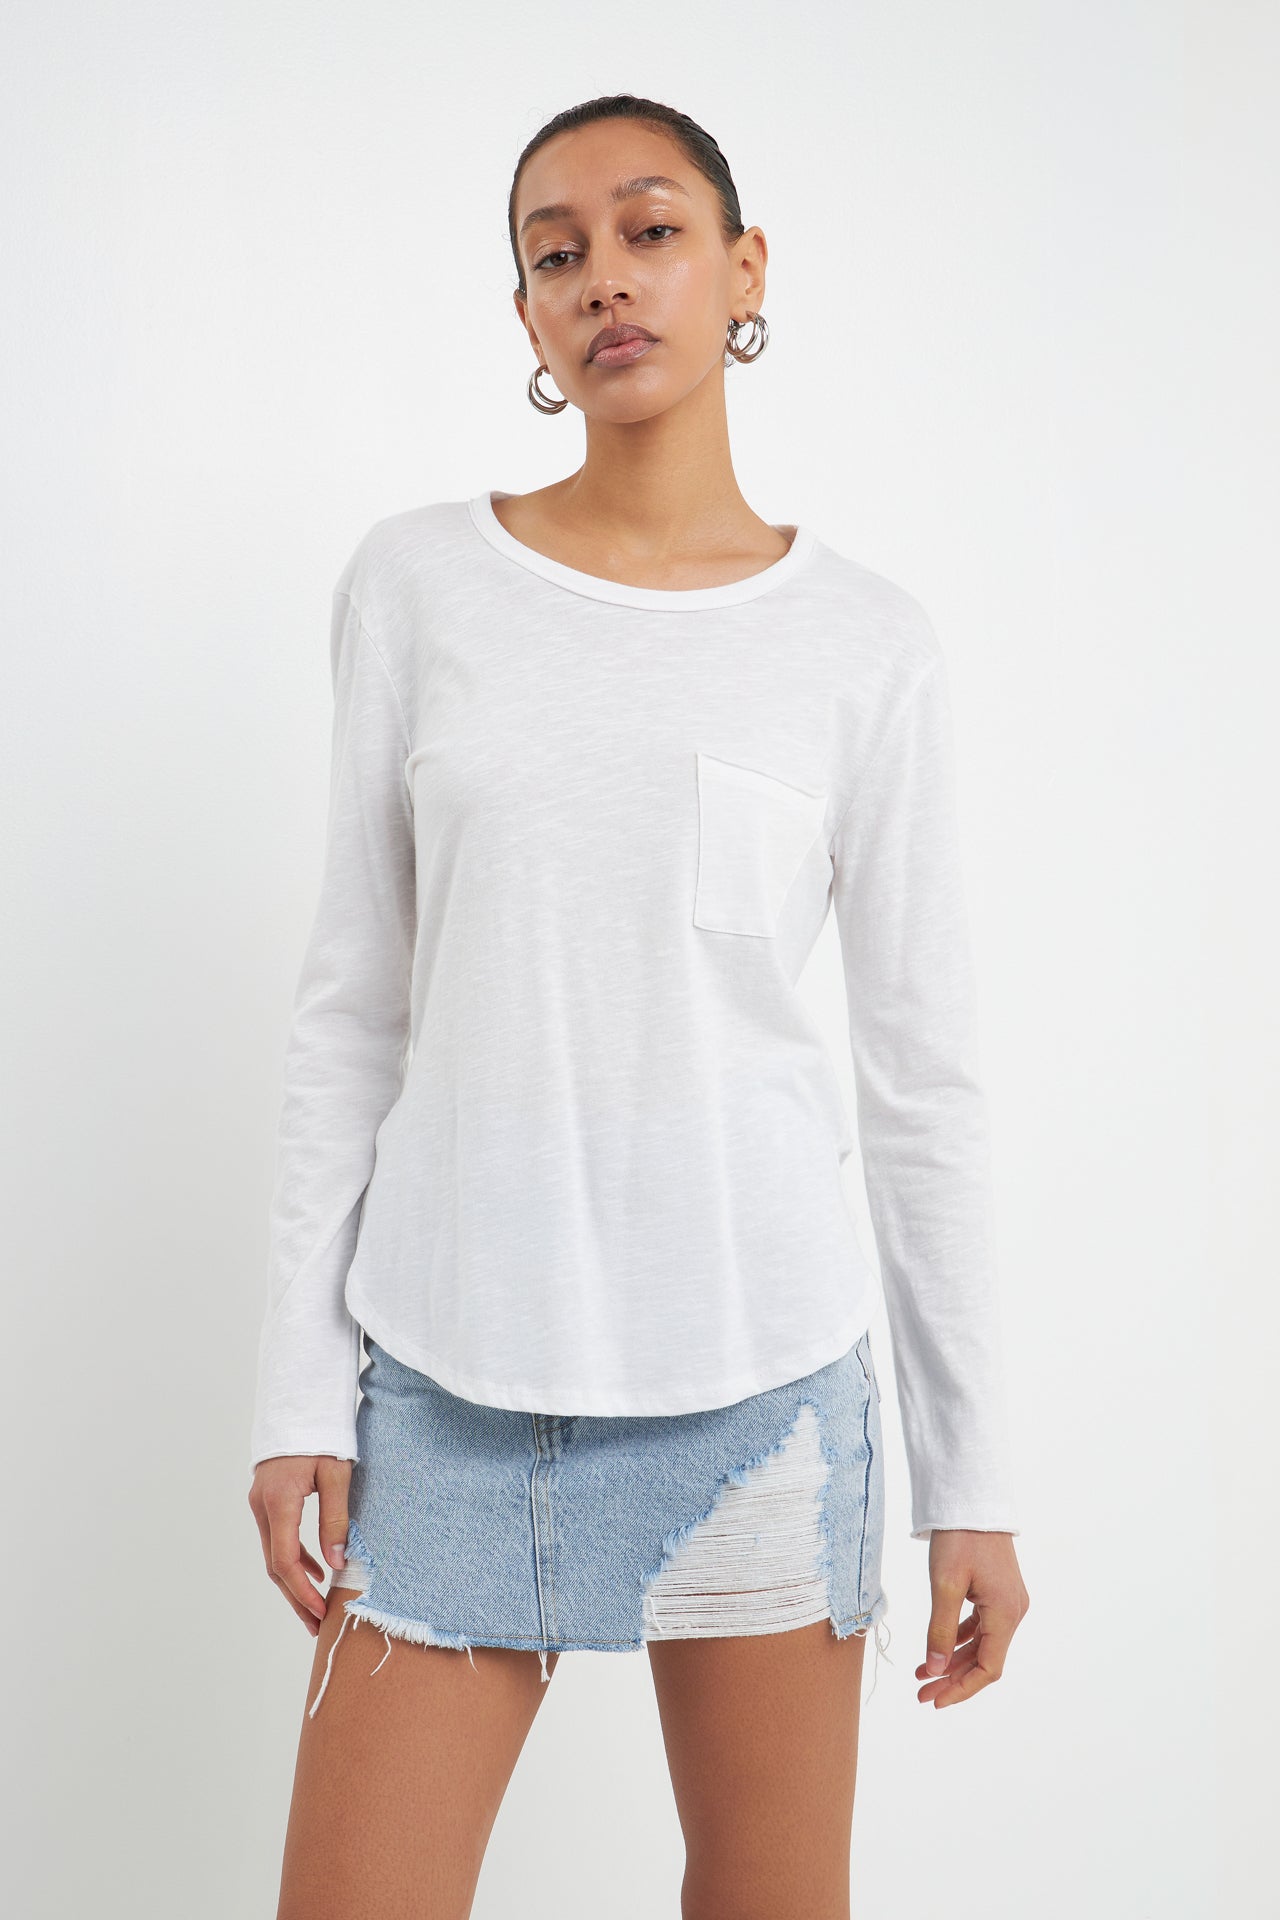 GREY LAB - Classic Round Neck Long Sleeves - TOPS available at Objectrare